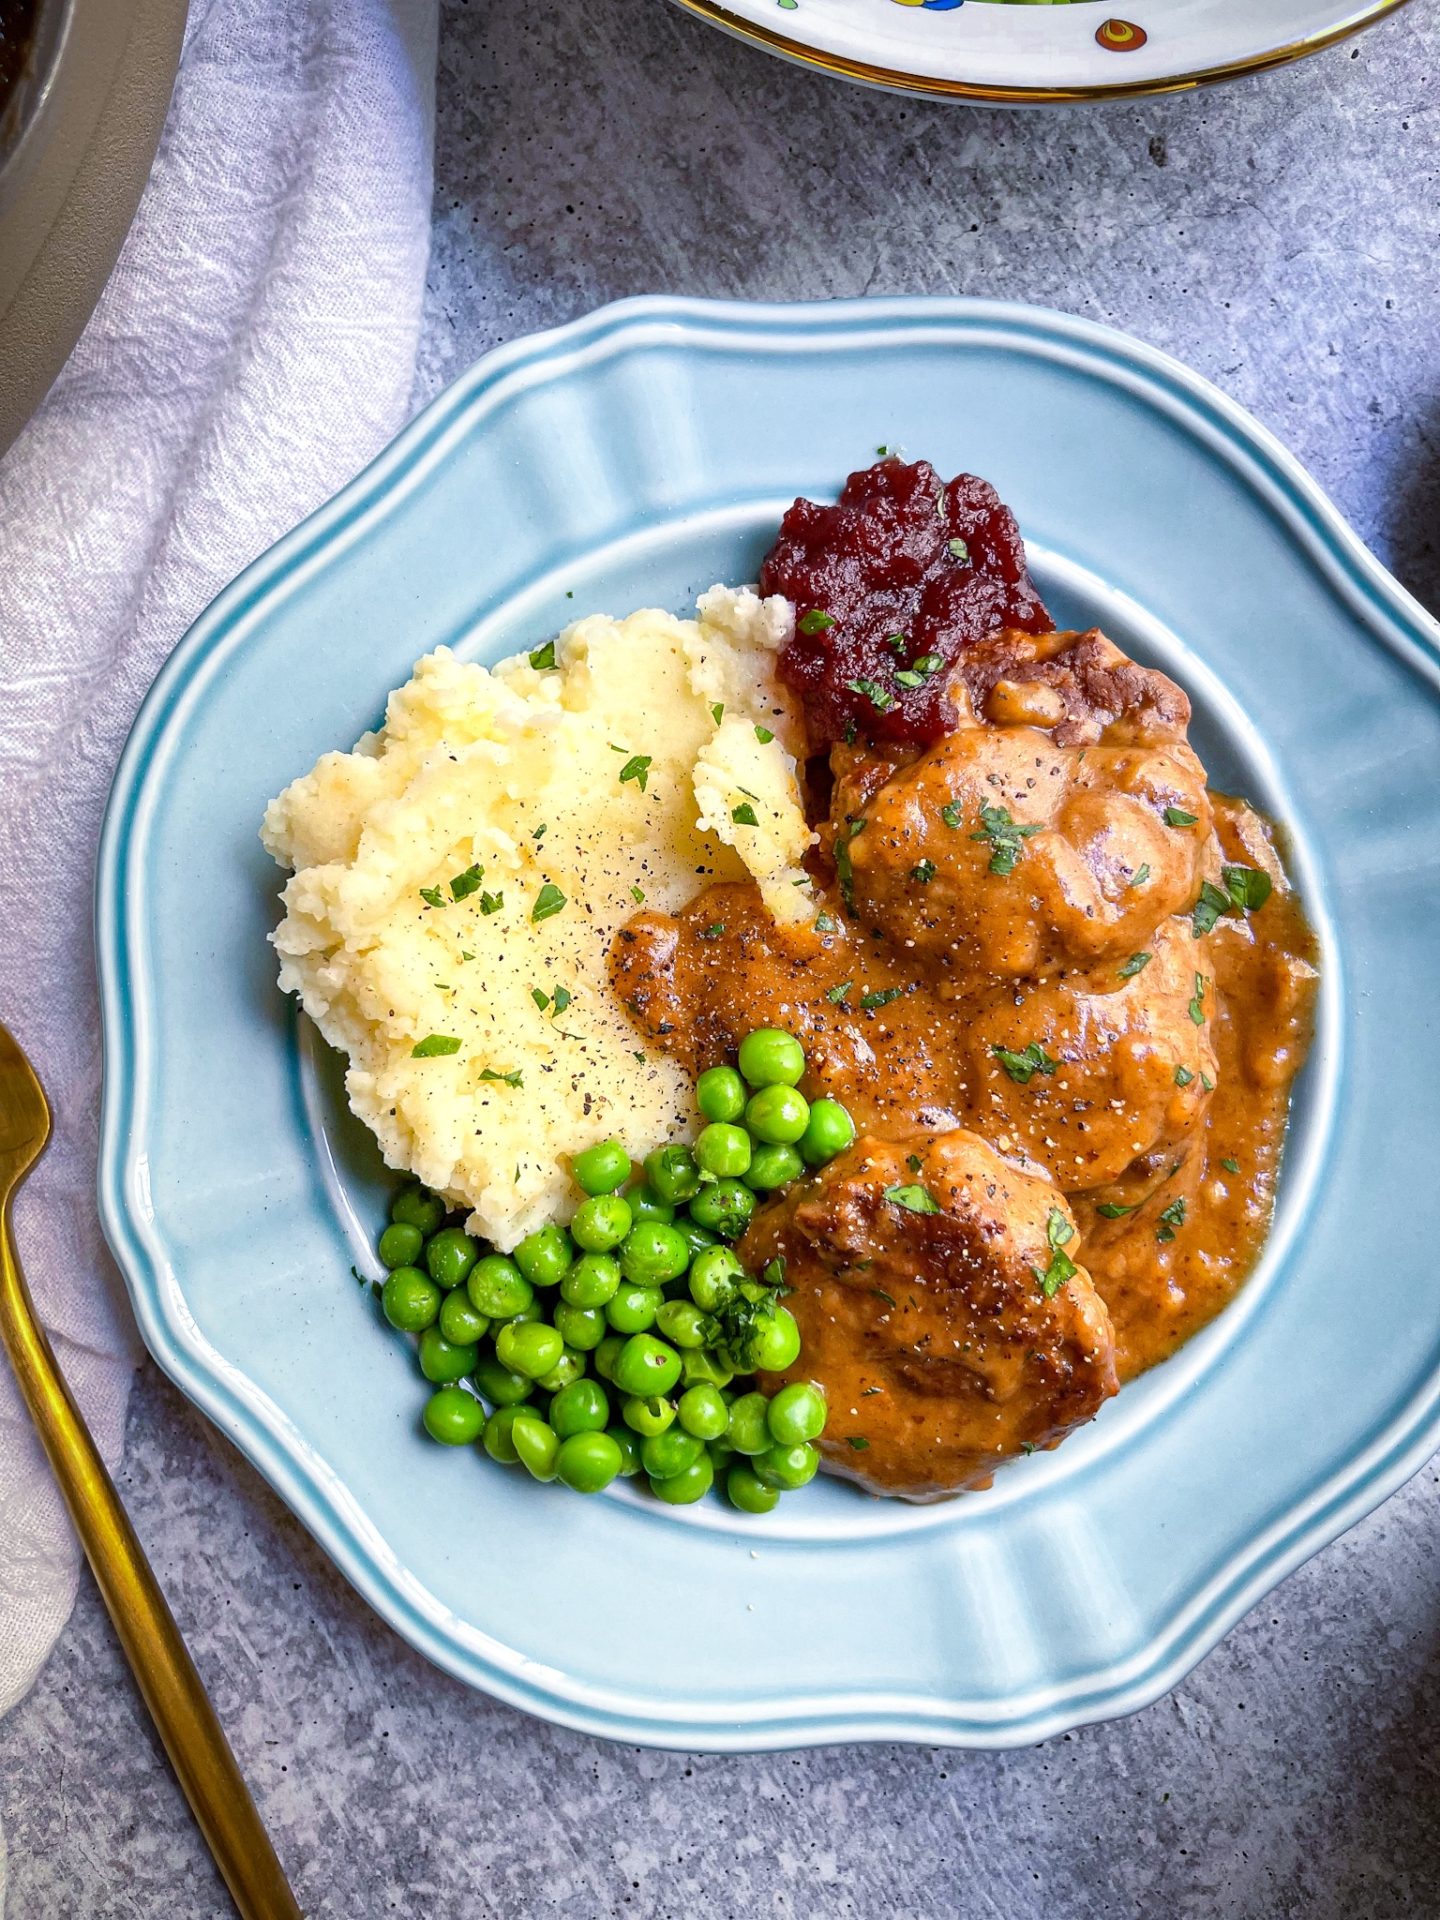 meatless Norwegian meatballs with dairy free gravy and mashed potatoes